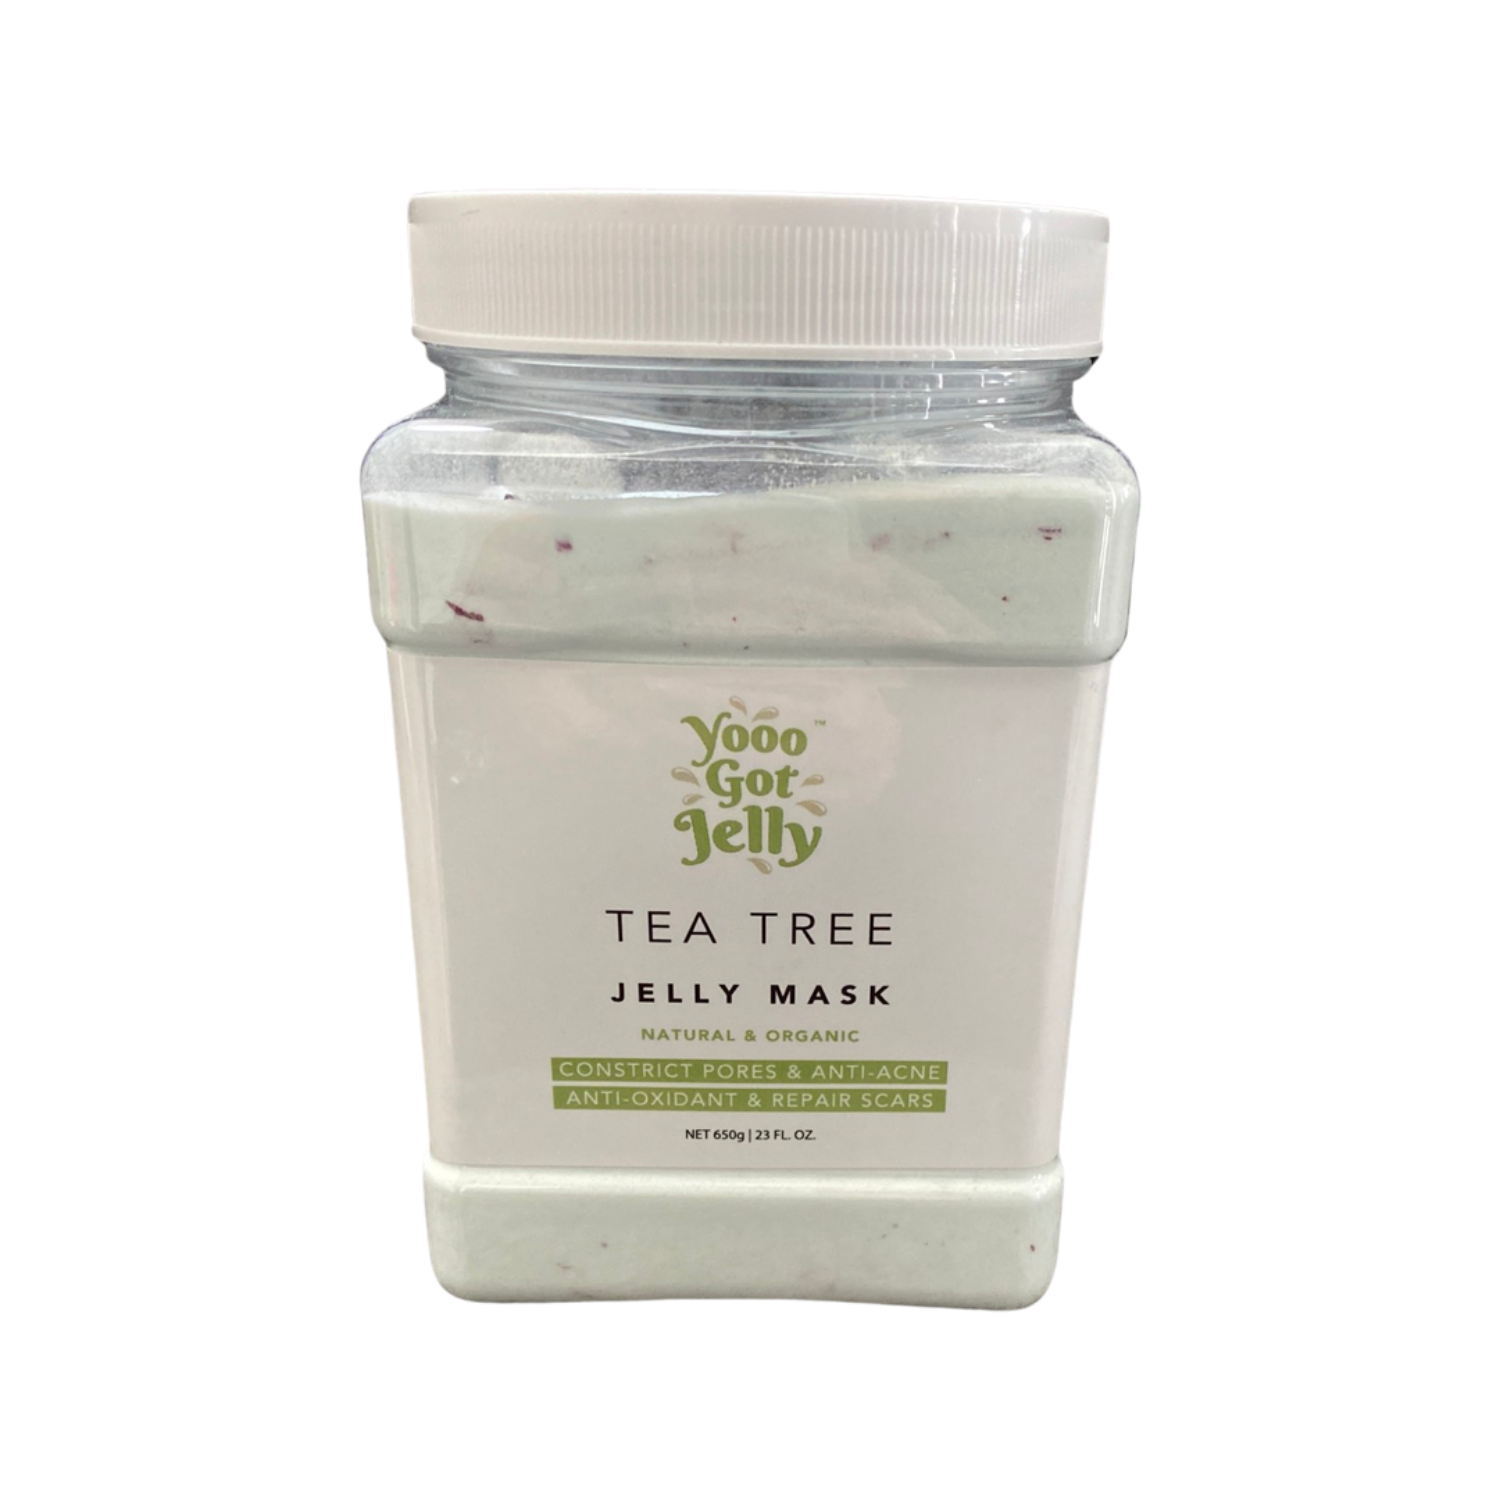 TEA TREE JELLY MASK - Minimizes Pores and Combats Acne